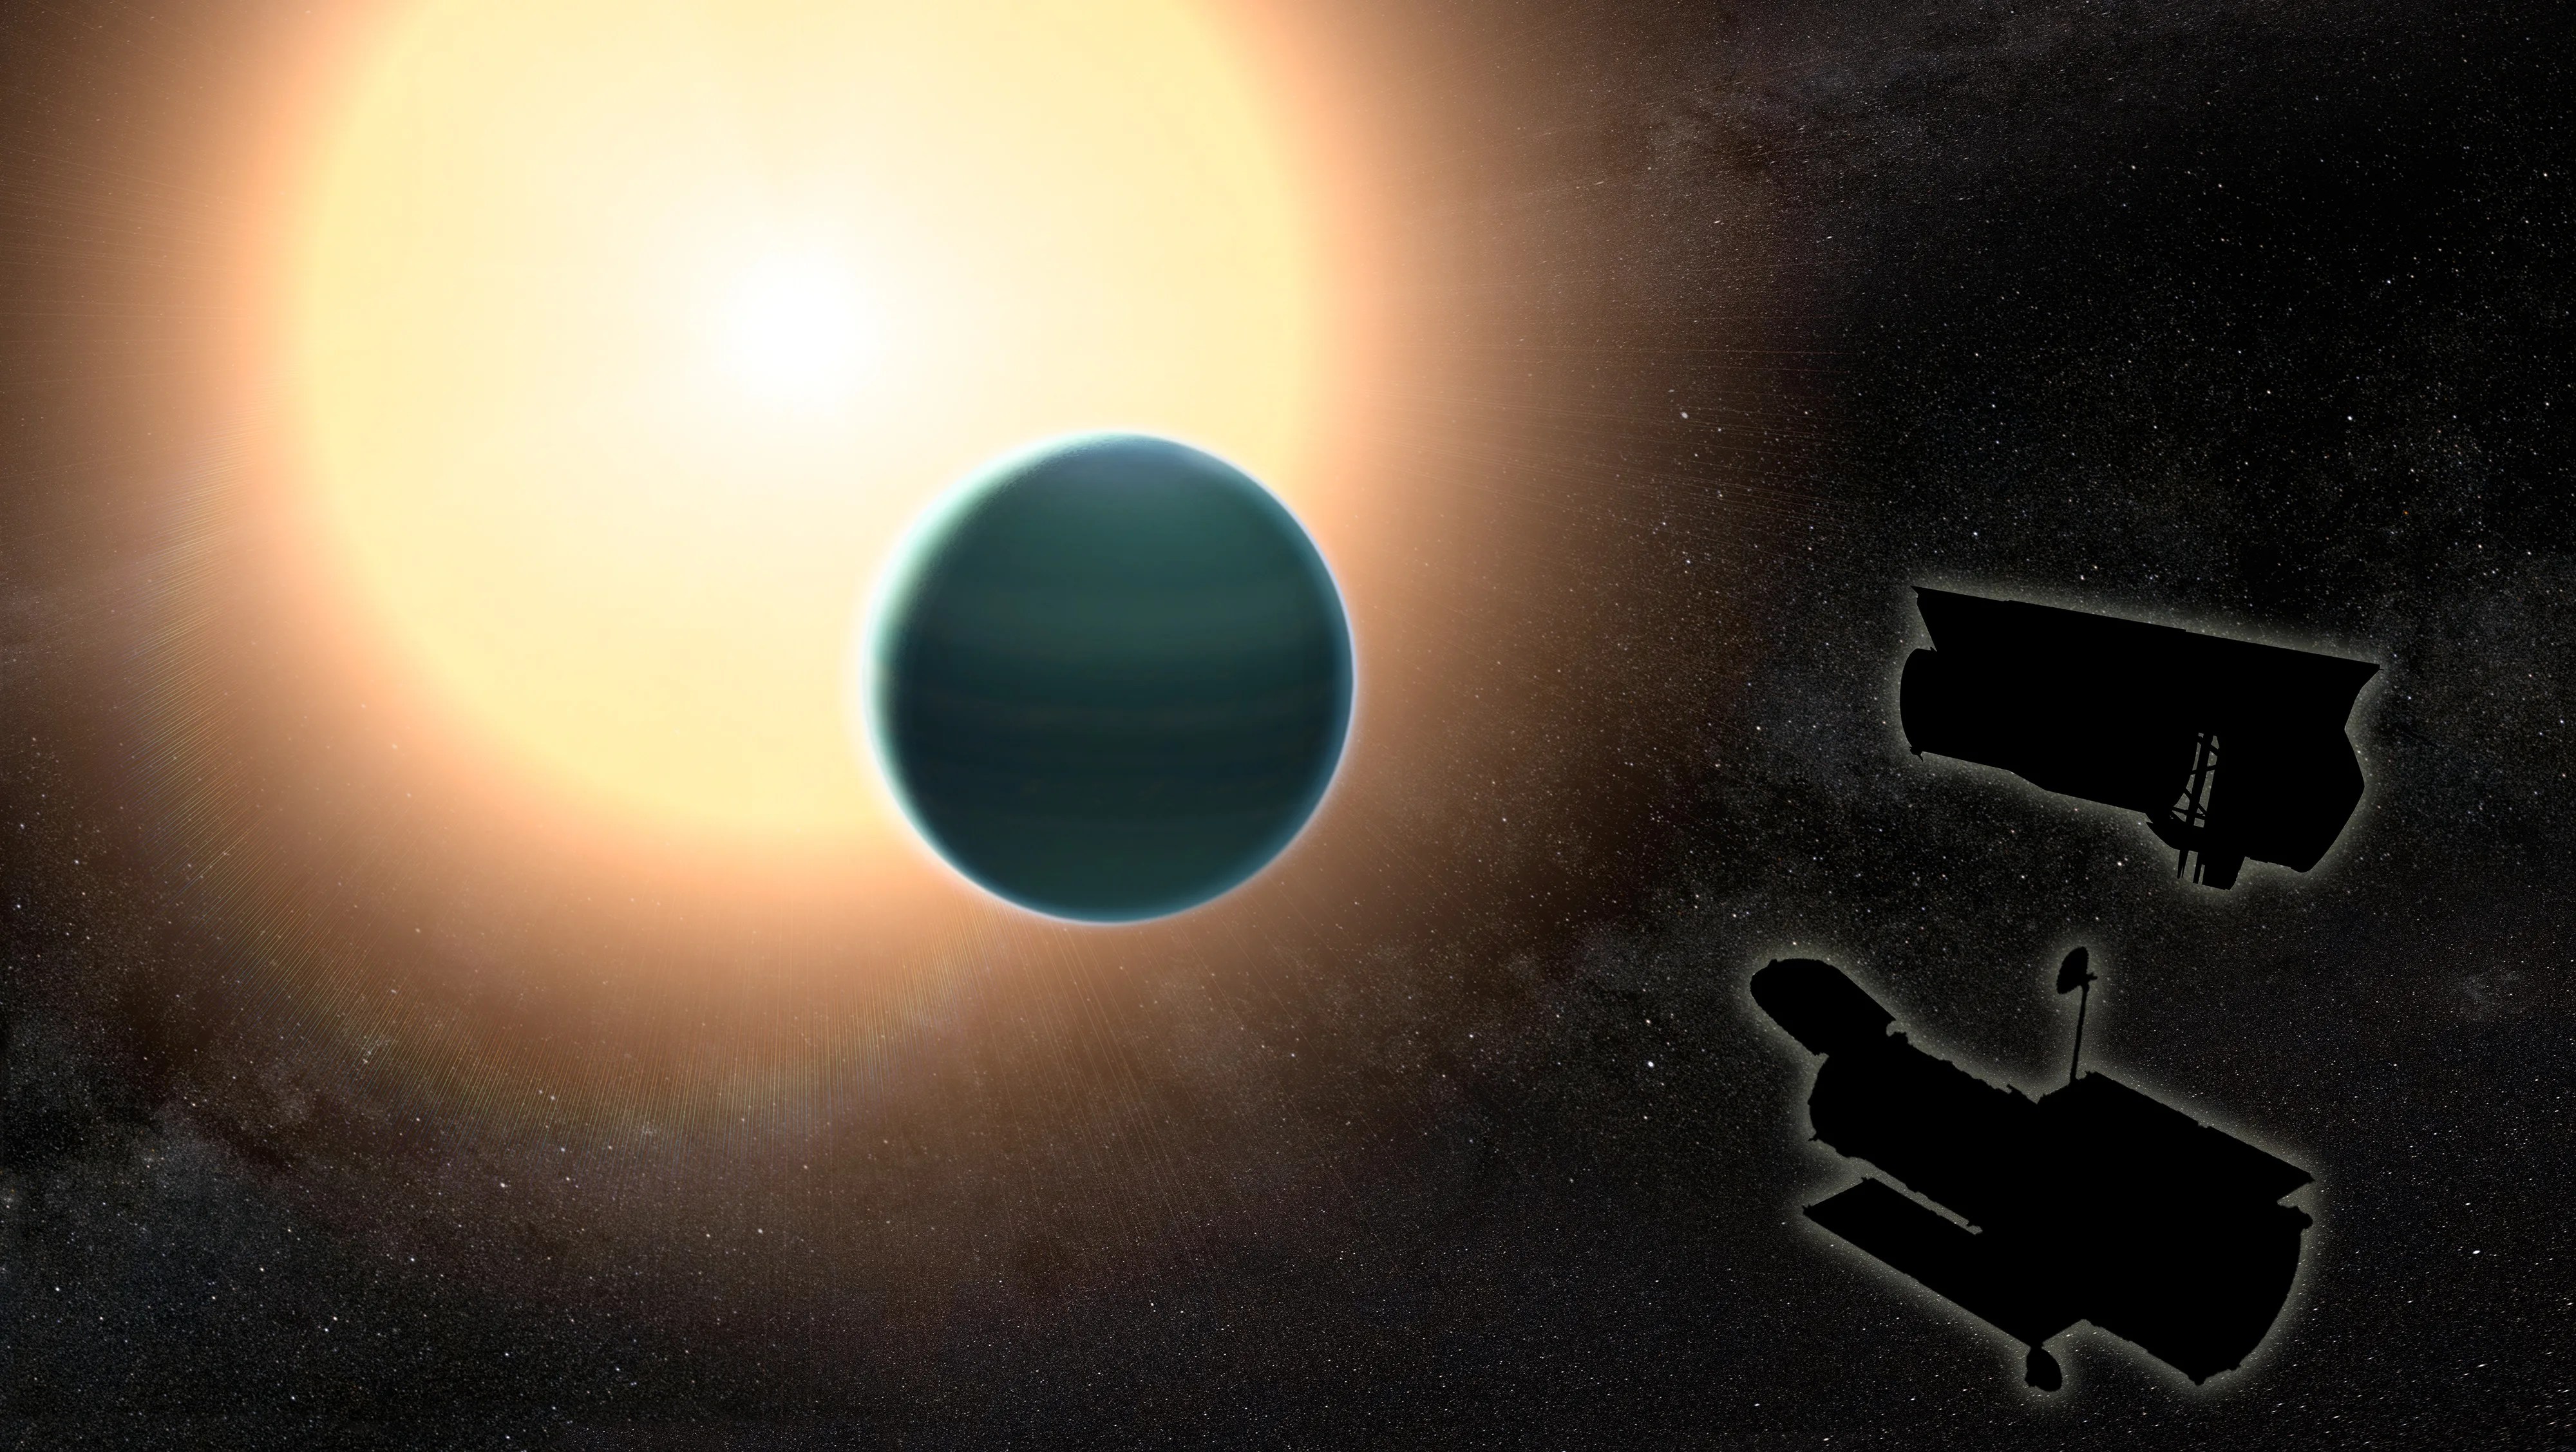 Illustration of the atmosphere of 'Warm Neptune'